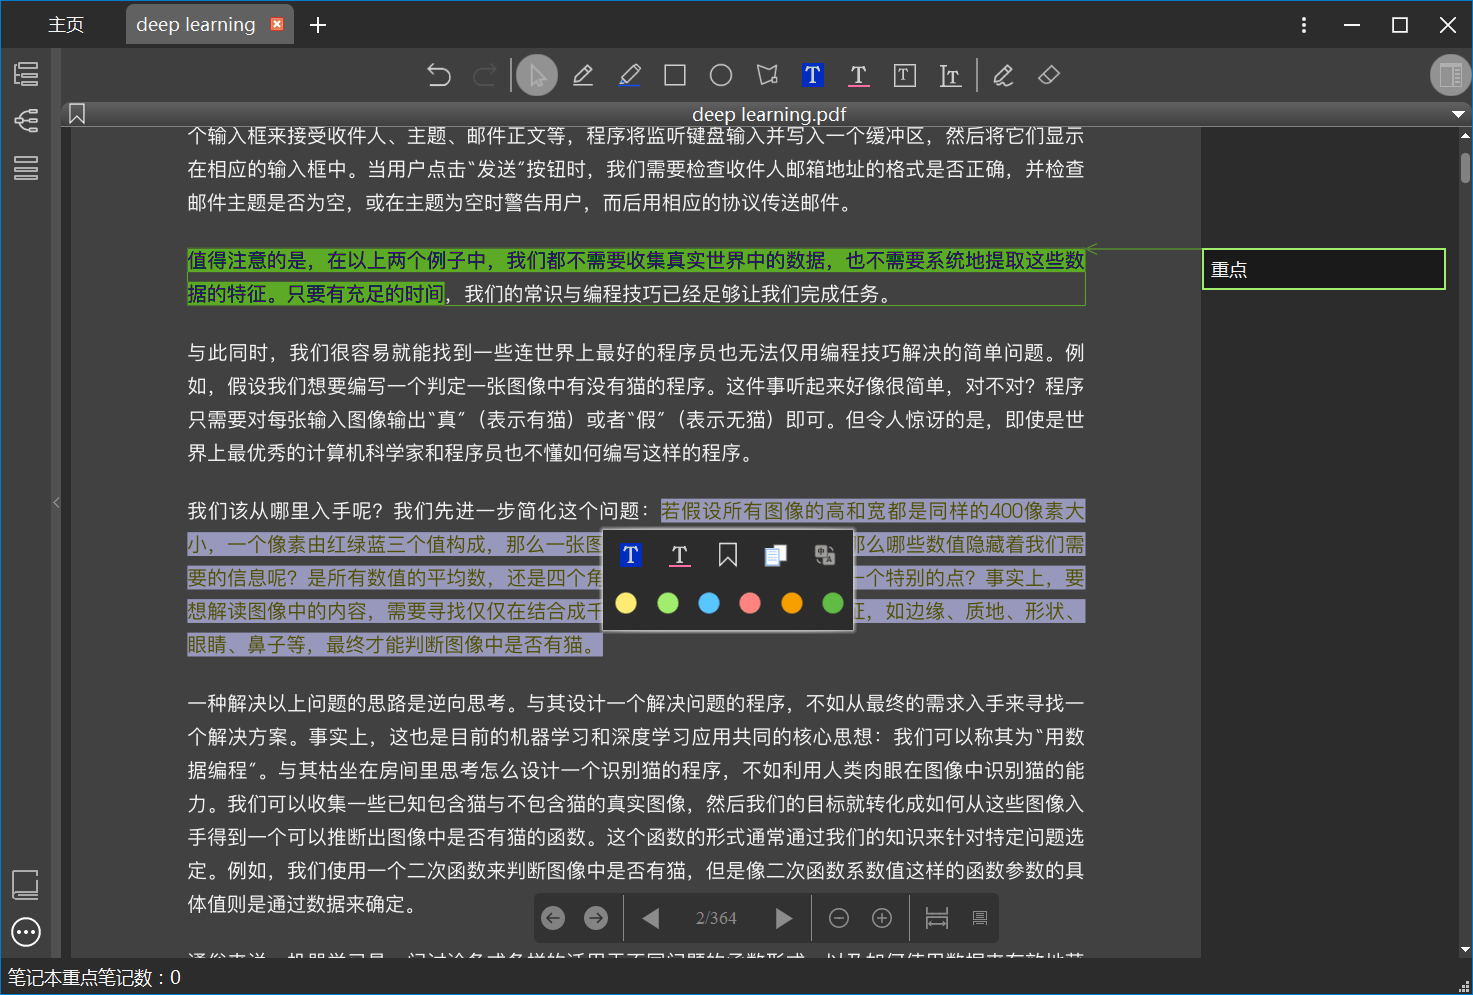 BookxNote Pro - 电子书学习软件：划重点做笔记，导出脑图[Windows/Android] 4